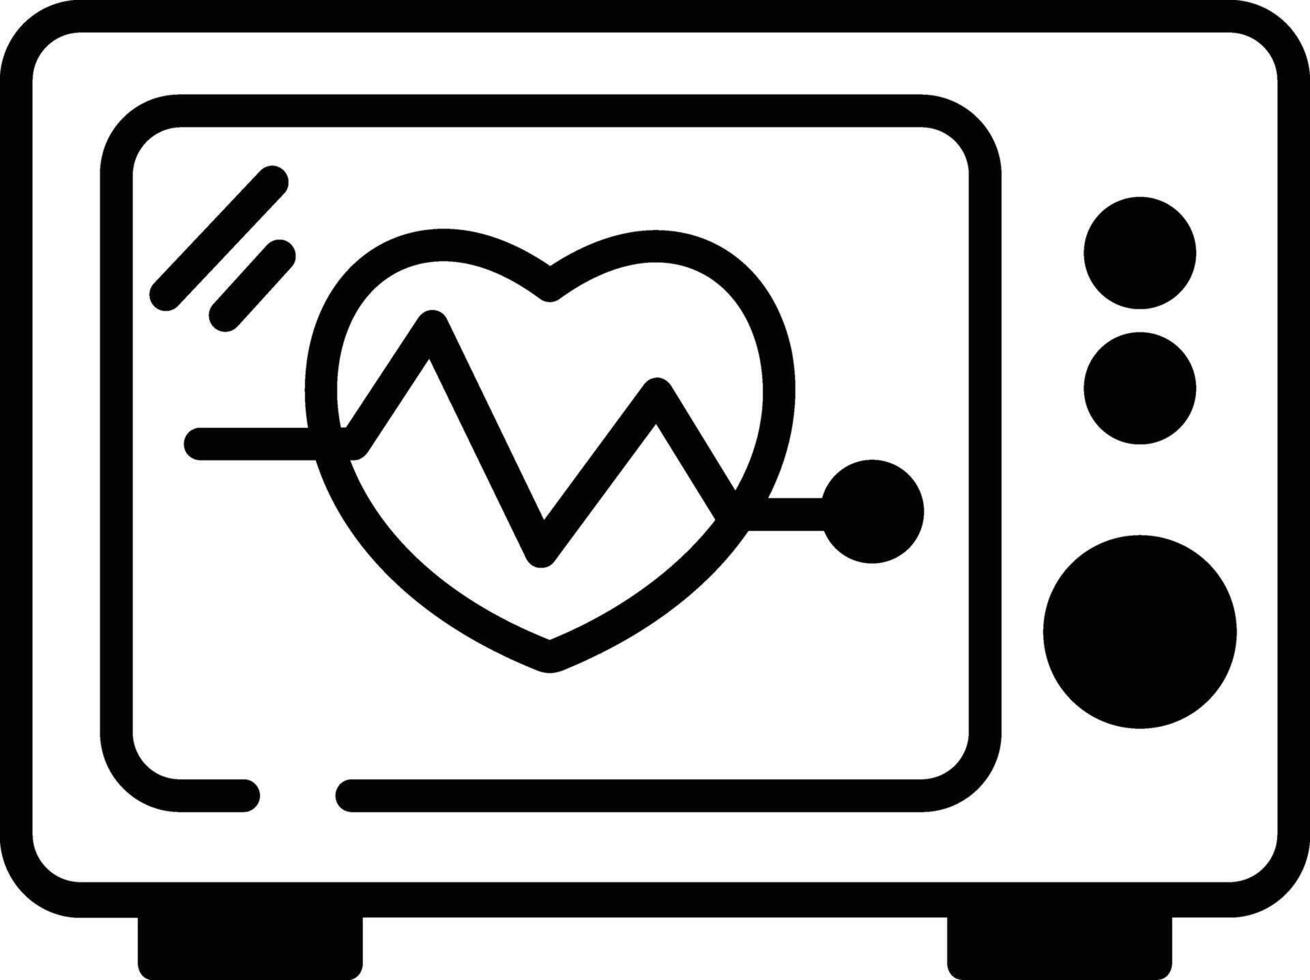 Cardiogram glyph and line vector illustration